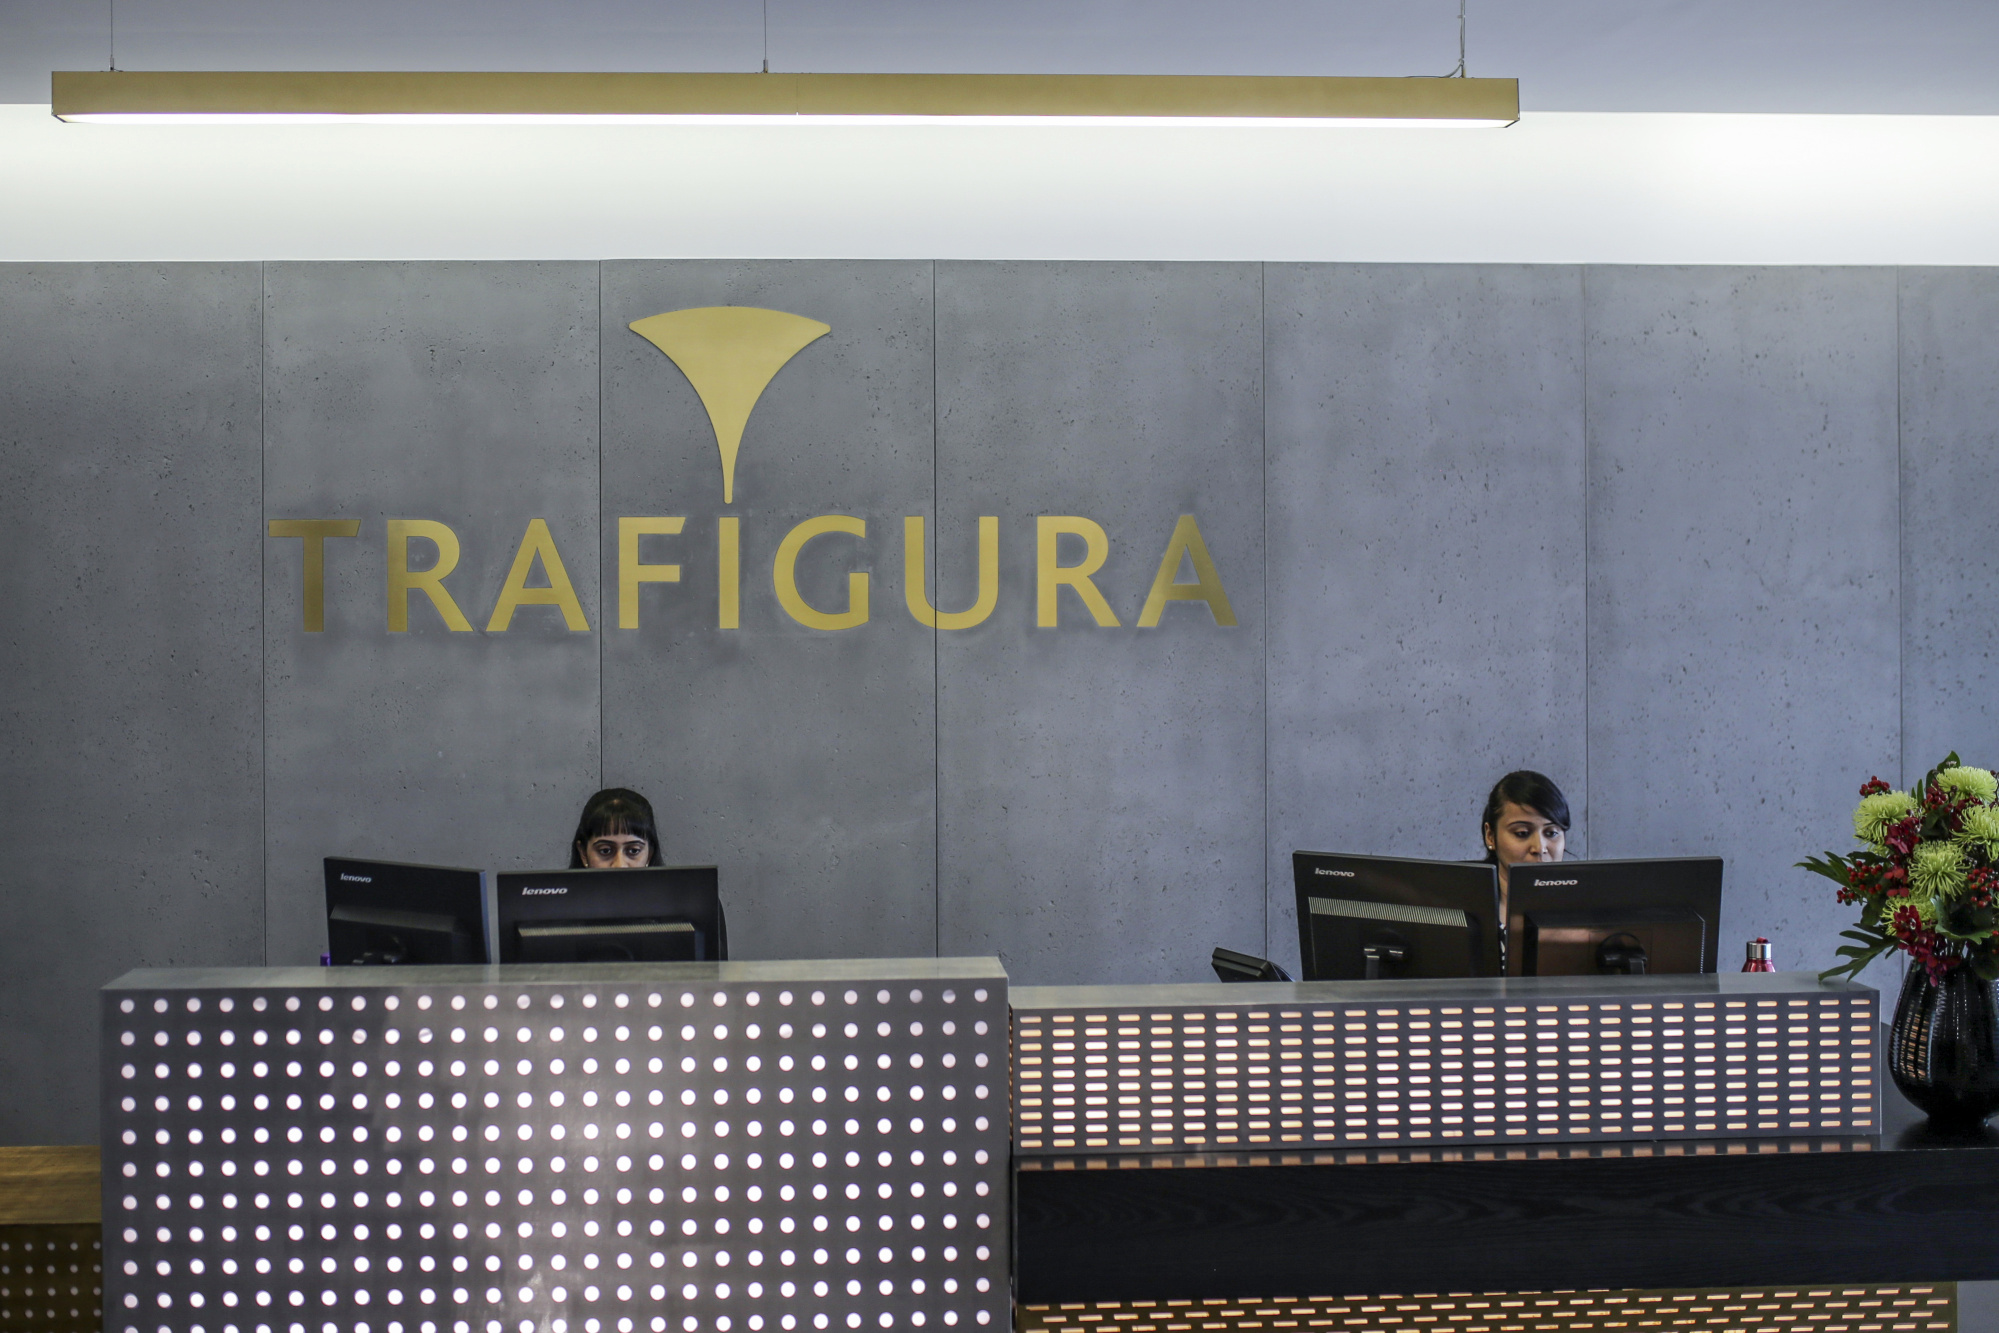 Trading Operations at Trafigura India's Office and Interviews with Executives Including CEO Raoul Bajaj